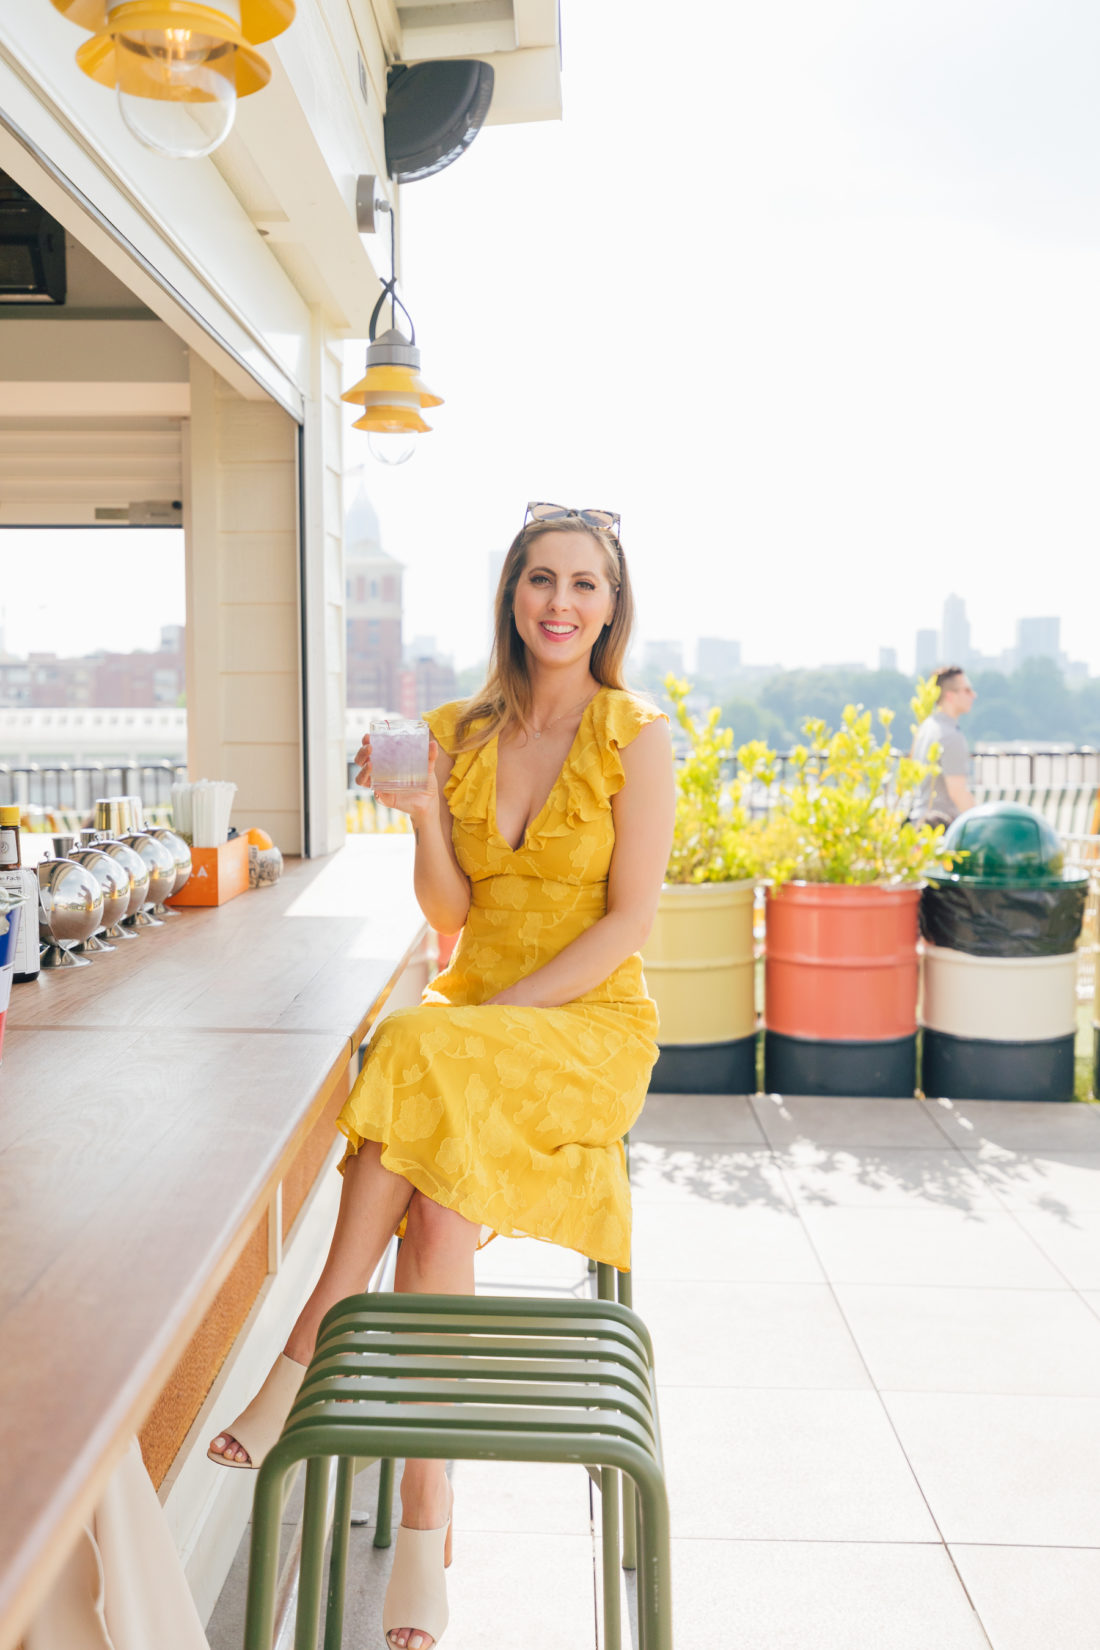 Eva Amurri Martino wears a bright yellow sress and sips on a cocktail at an outdoor bar